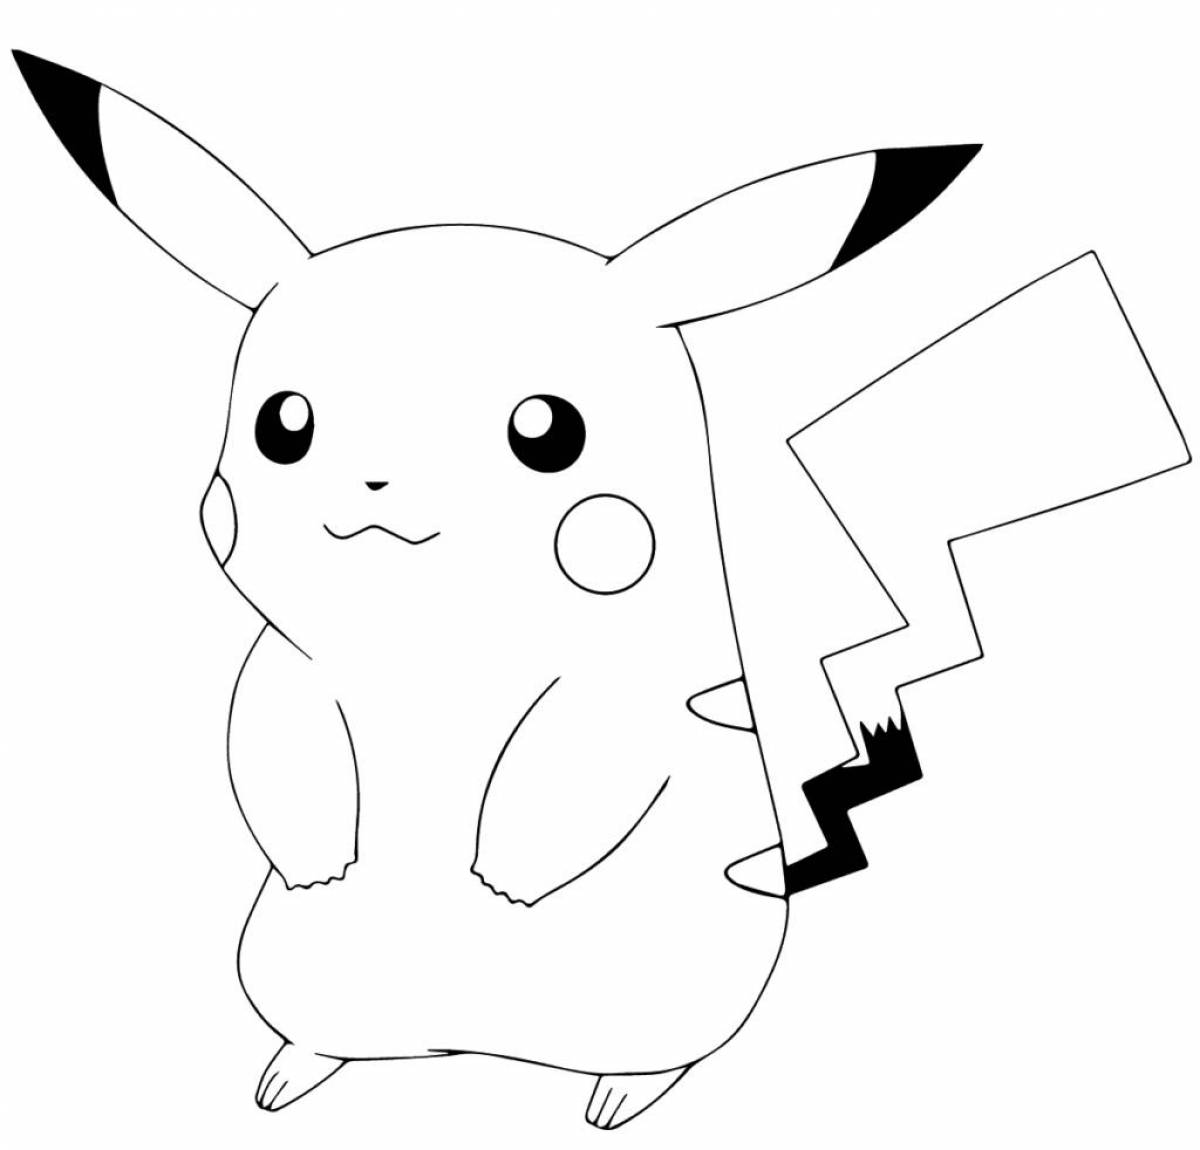 A wonderful pikachu coloring book for kids